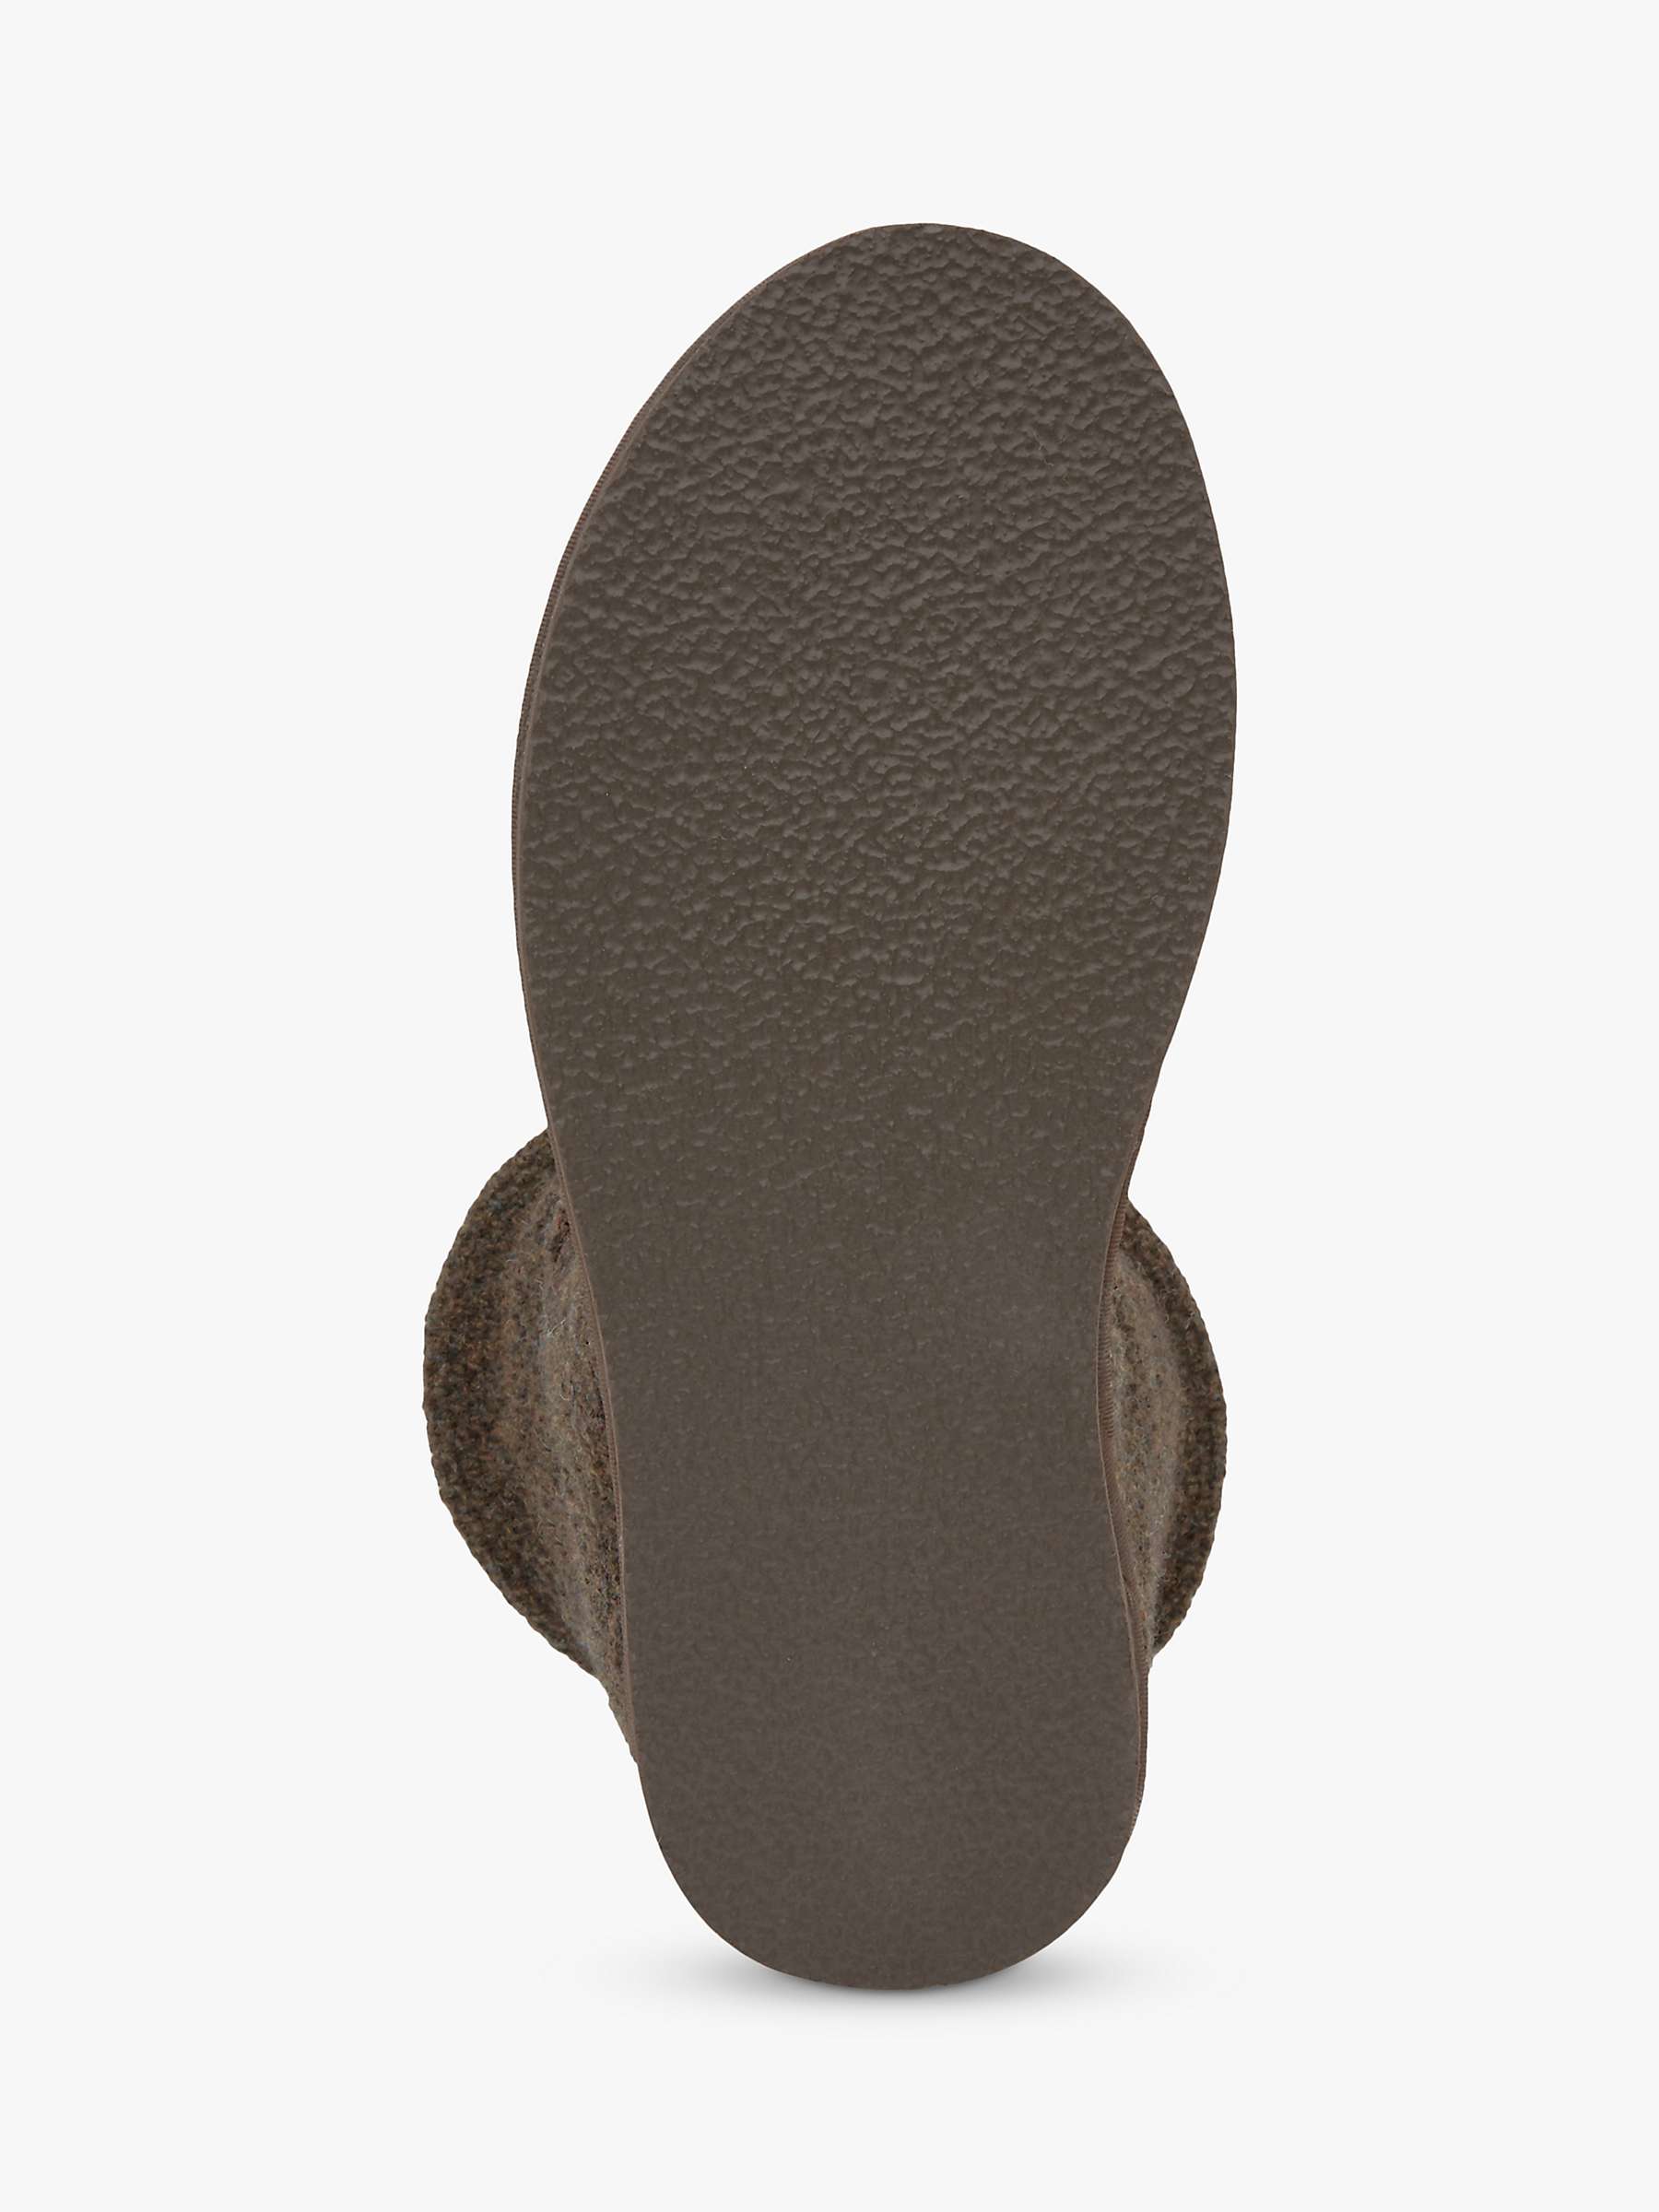 Buy Celtic & Co. Knitted Sheepskin Shortie Slippers, Tanners Brown Online at johnlewis.com